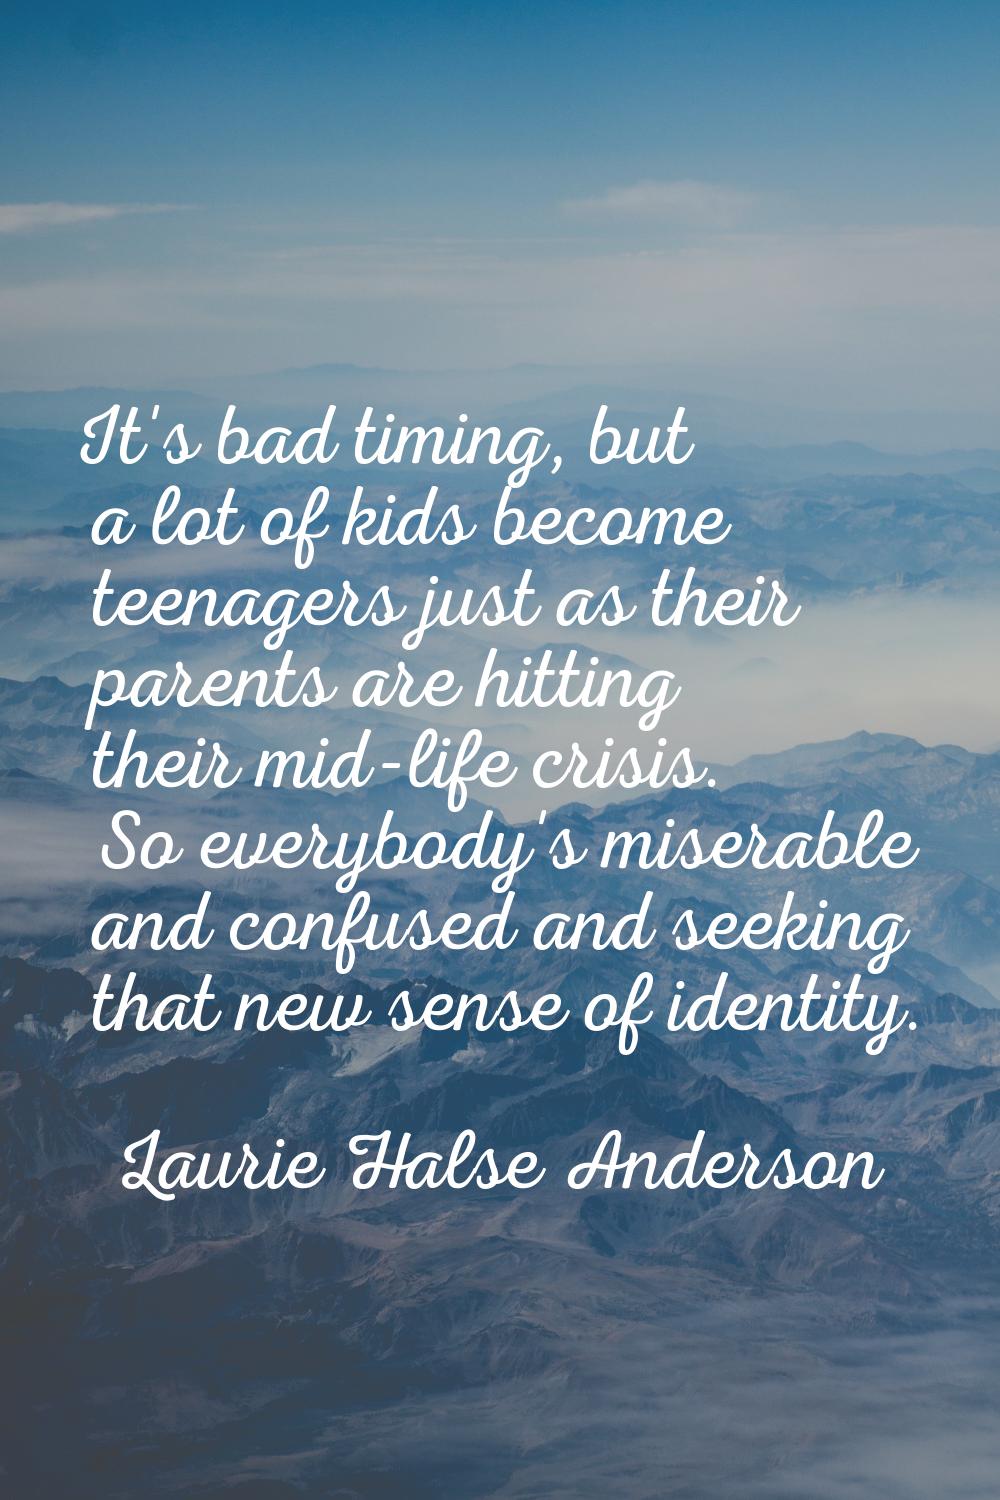 It's bad timing, but a lot of kids become teenagers just as their parents are hitting their mid-lif